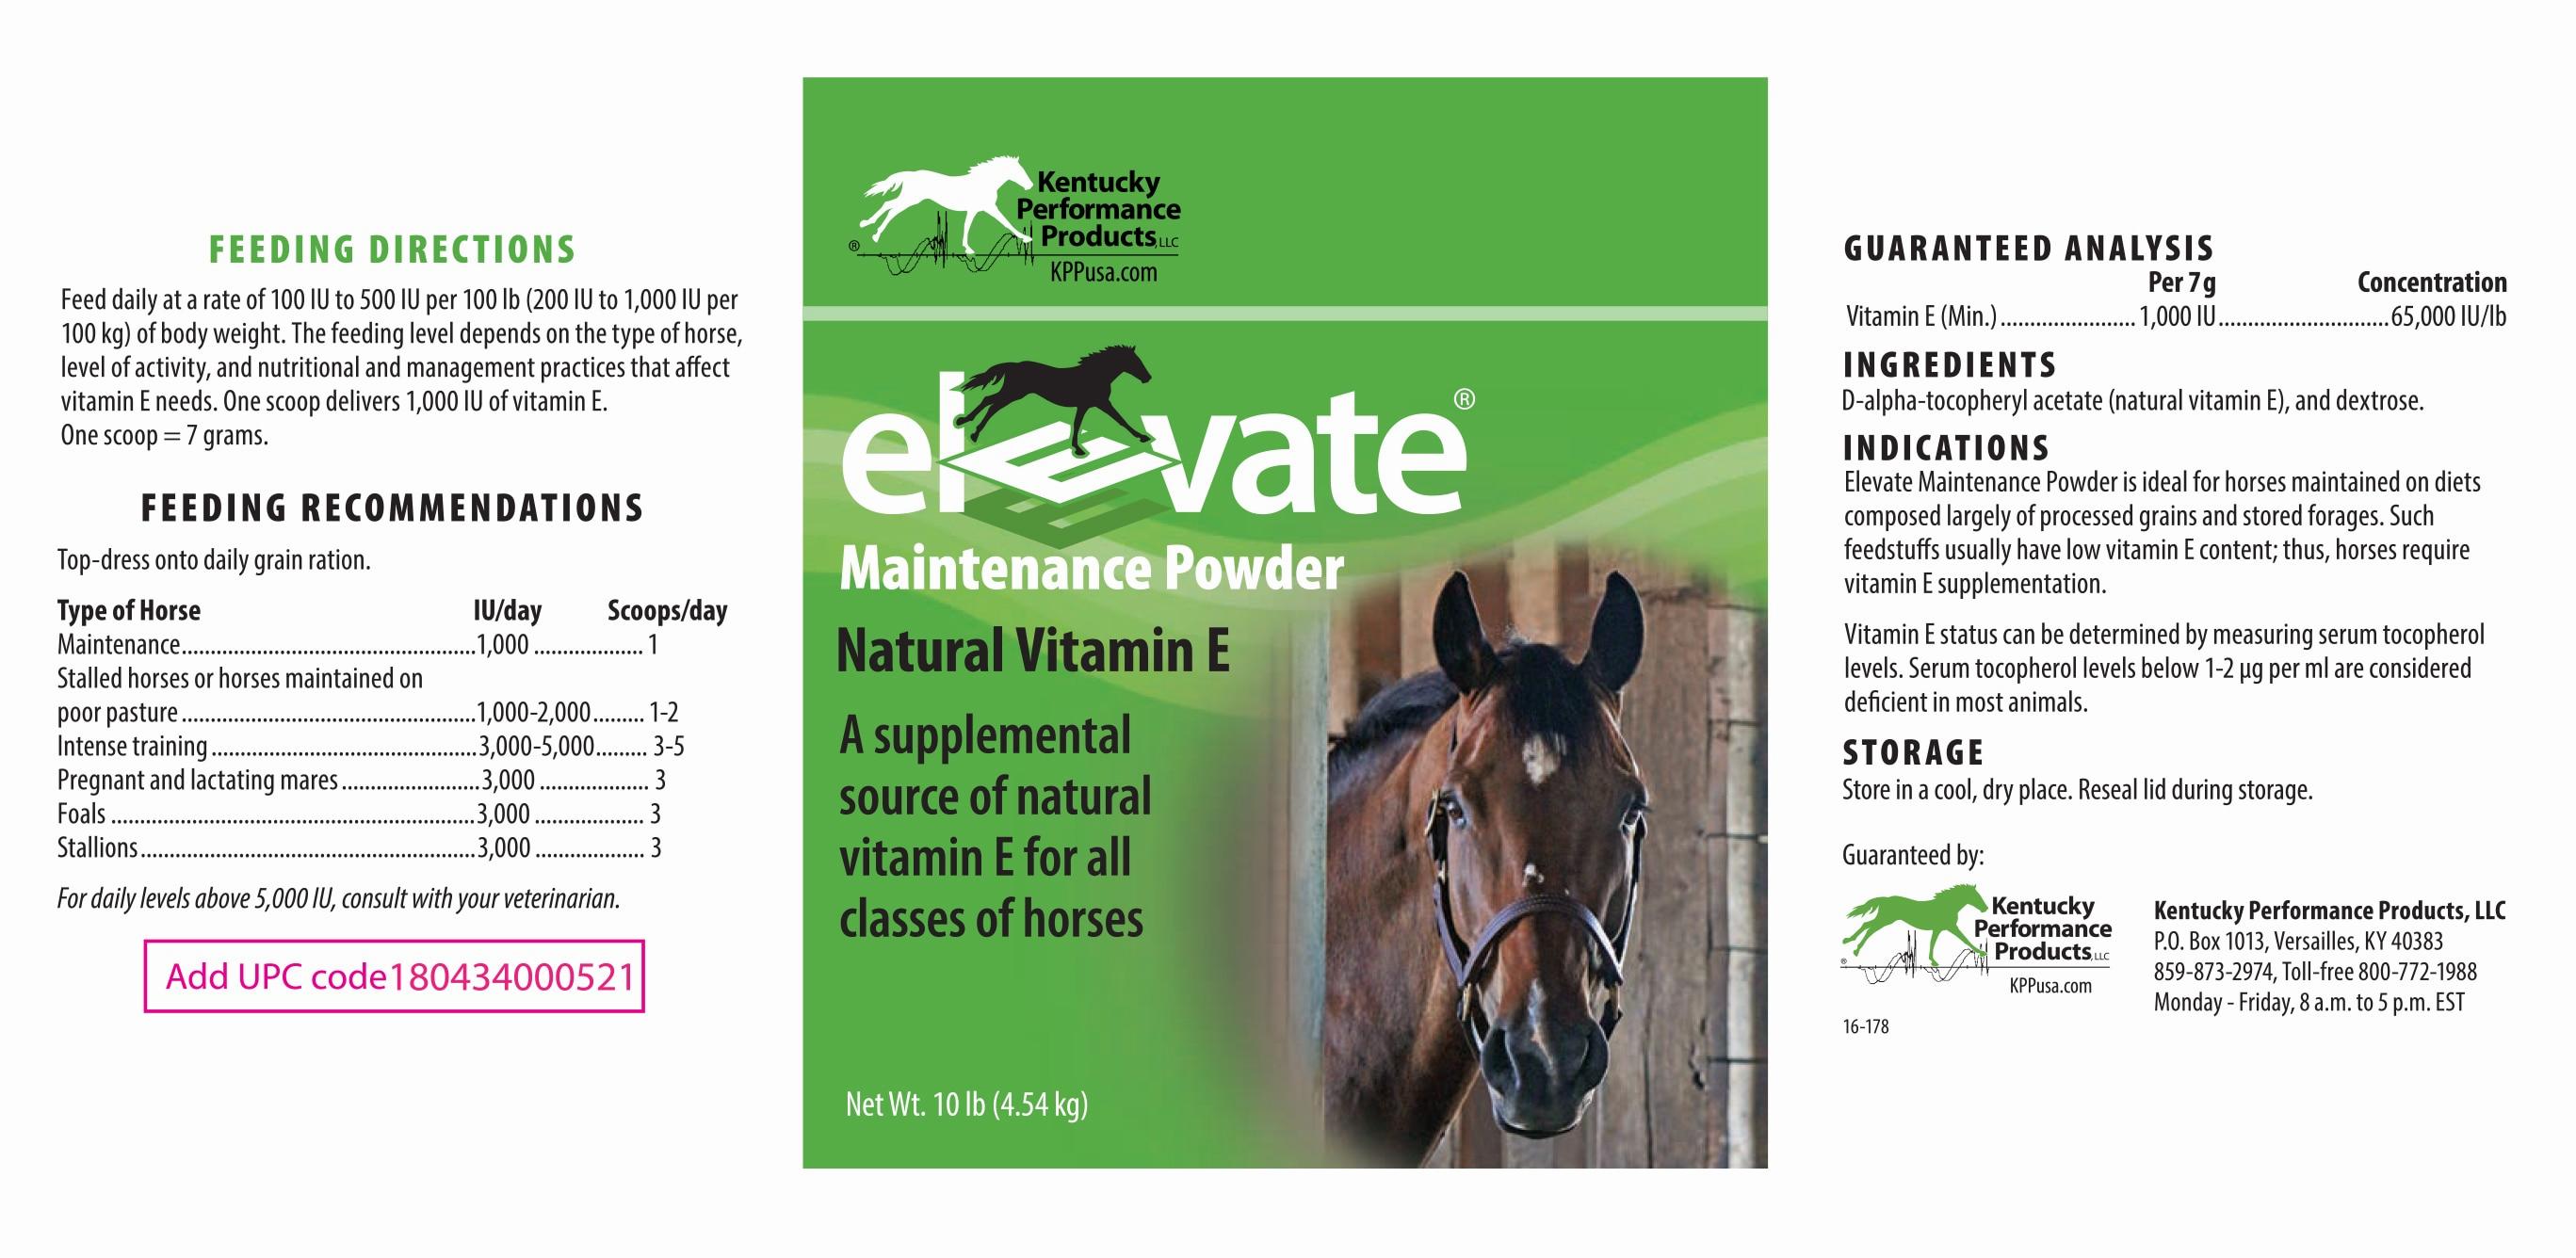 A white tub of Elevate Maintenance Powder, a vitamin E supplement for horses.